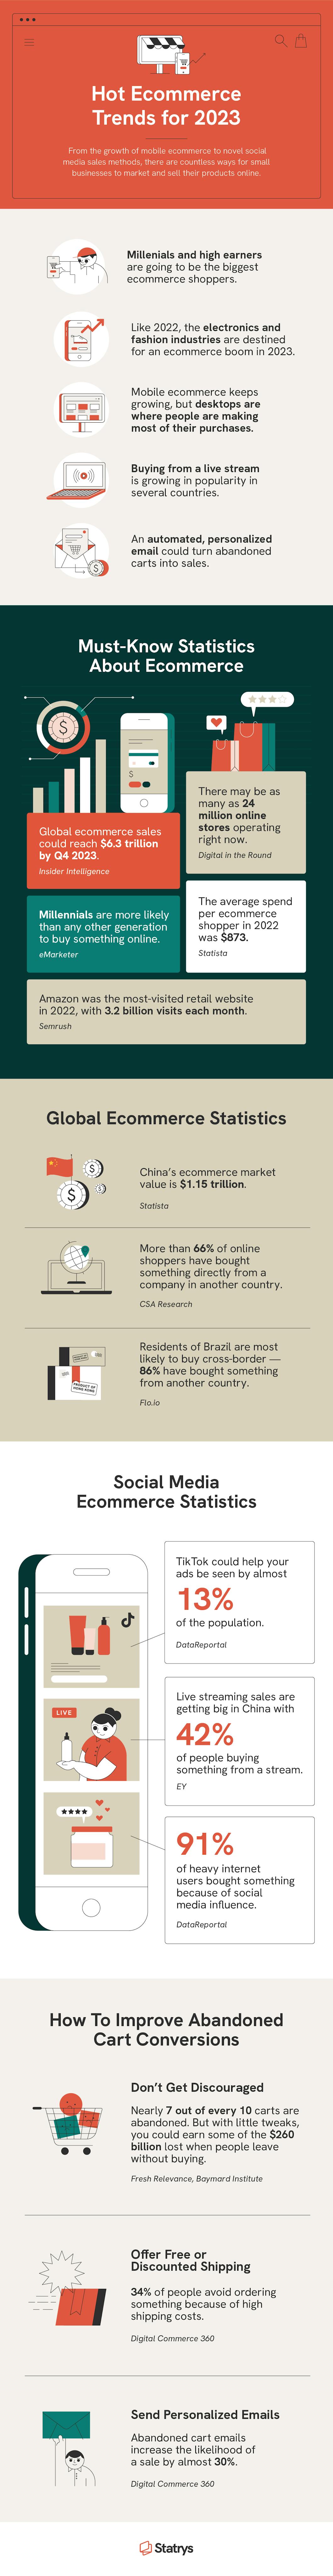 An infographic showcases must-know ecommerce statistics and trends for 2023.
